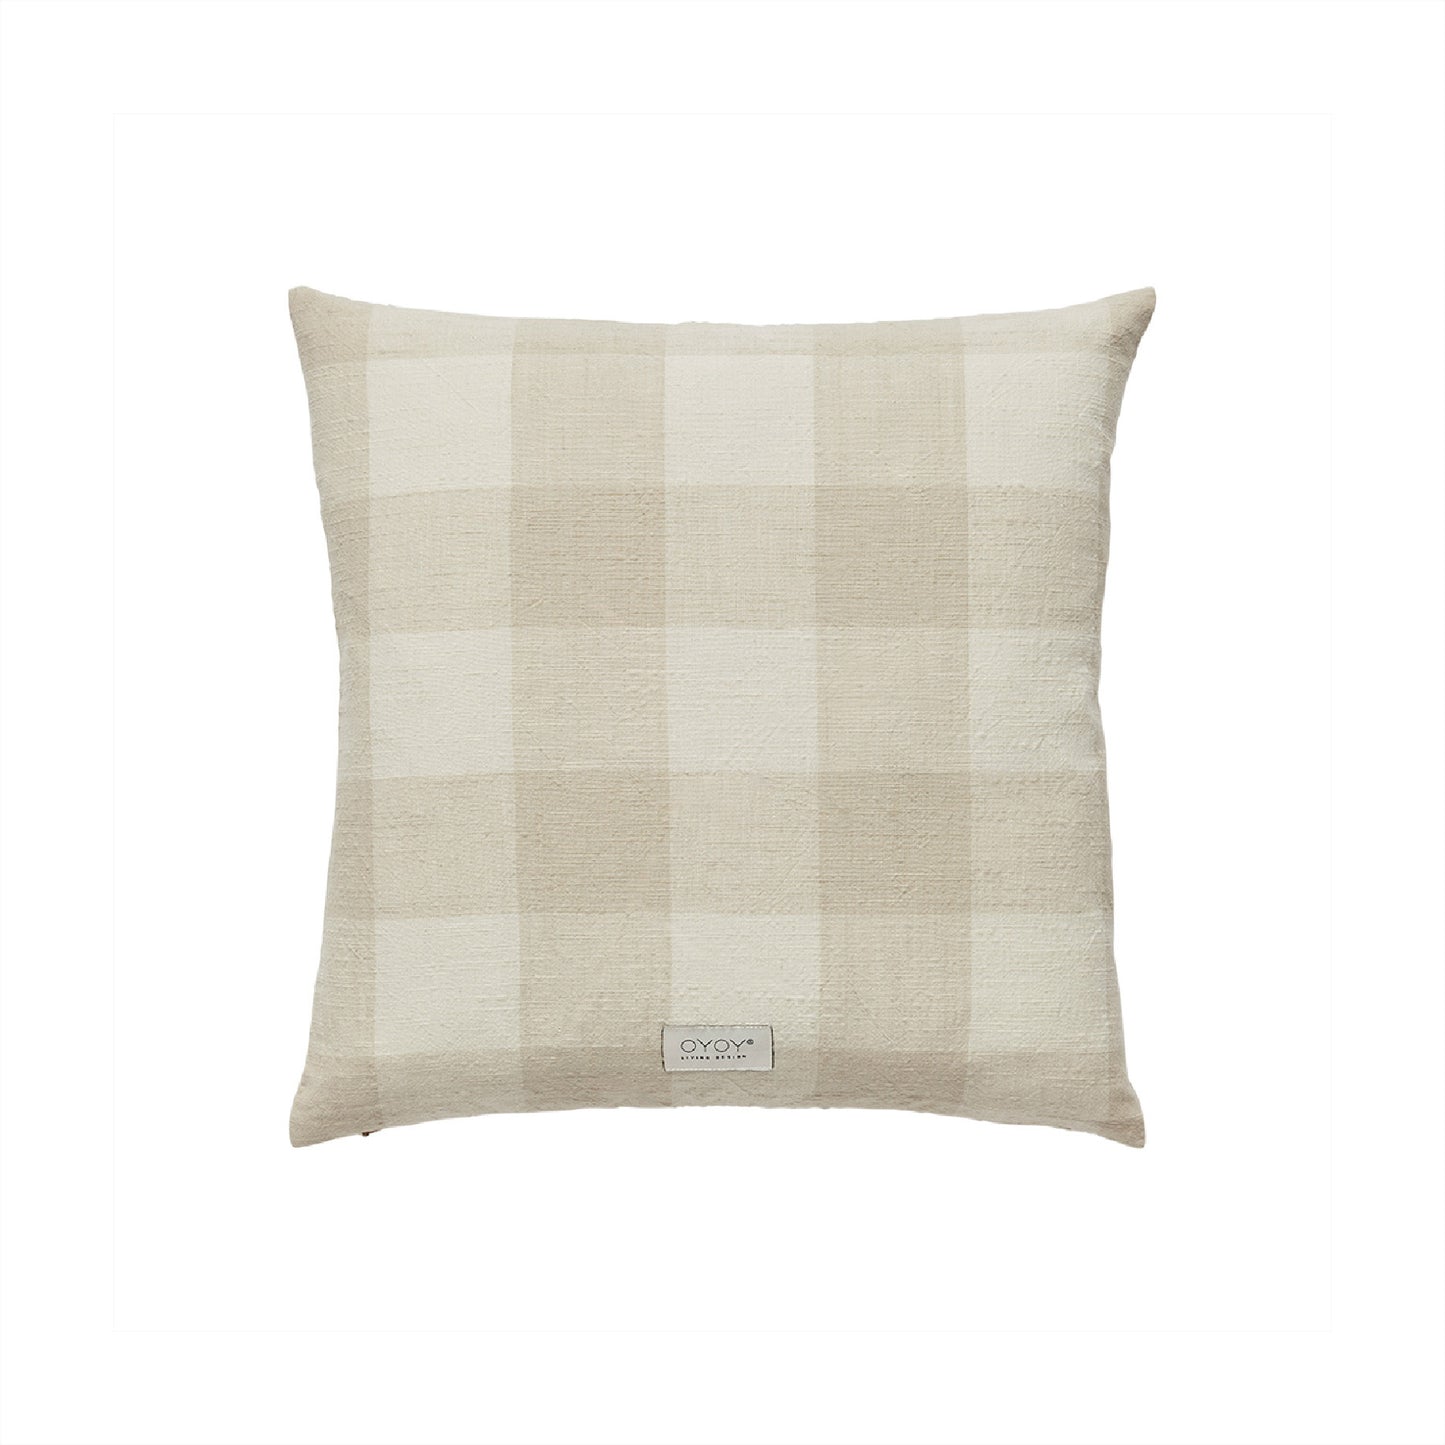 OYOY LIVING Chess Cushion Cover Square Cushion Cover